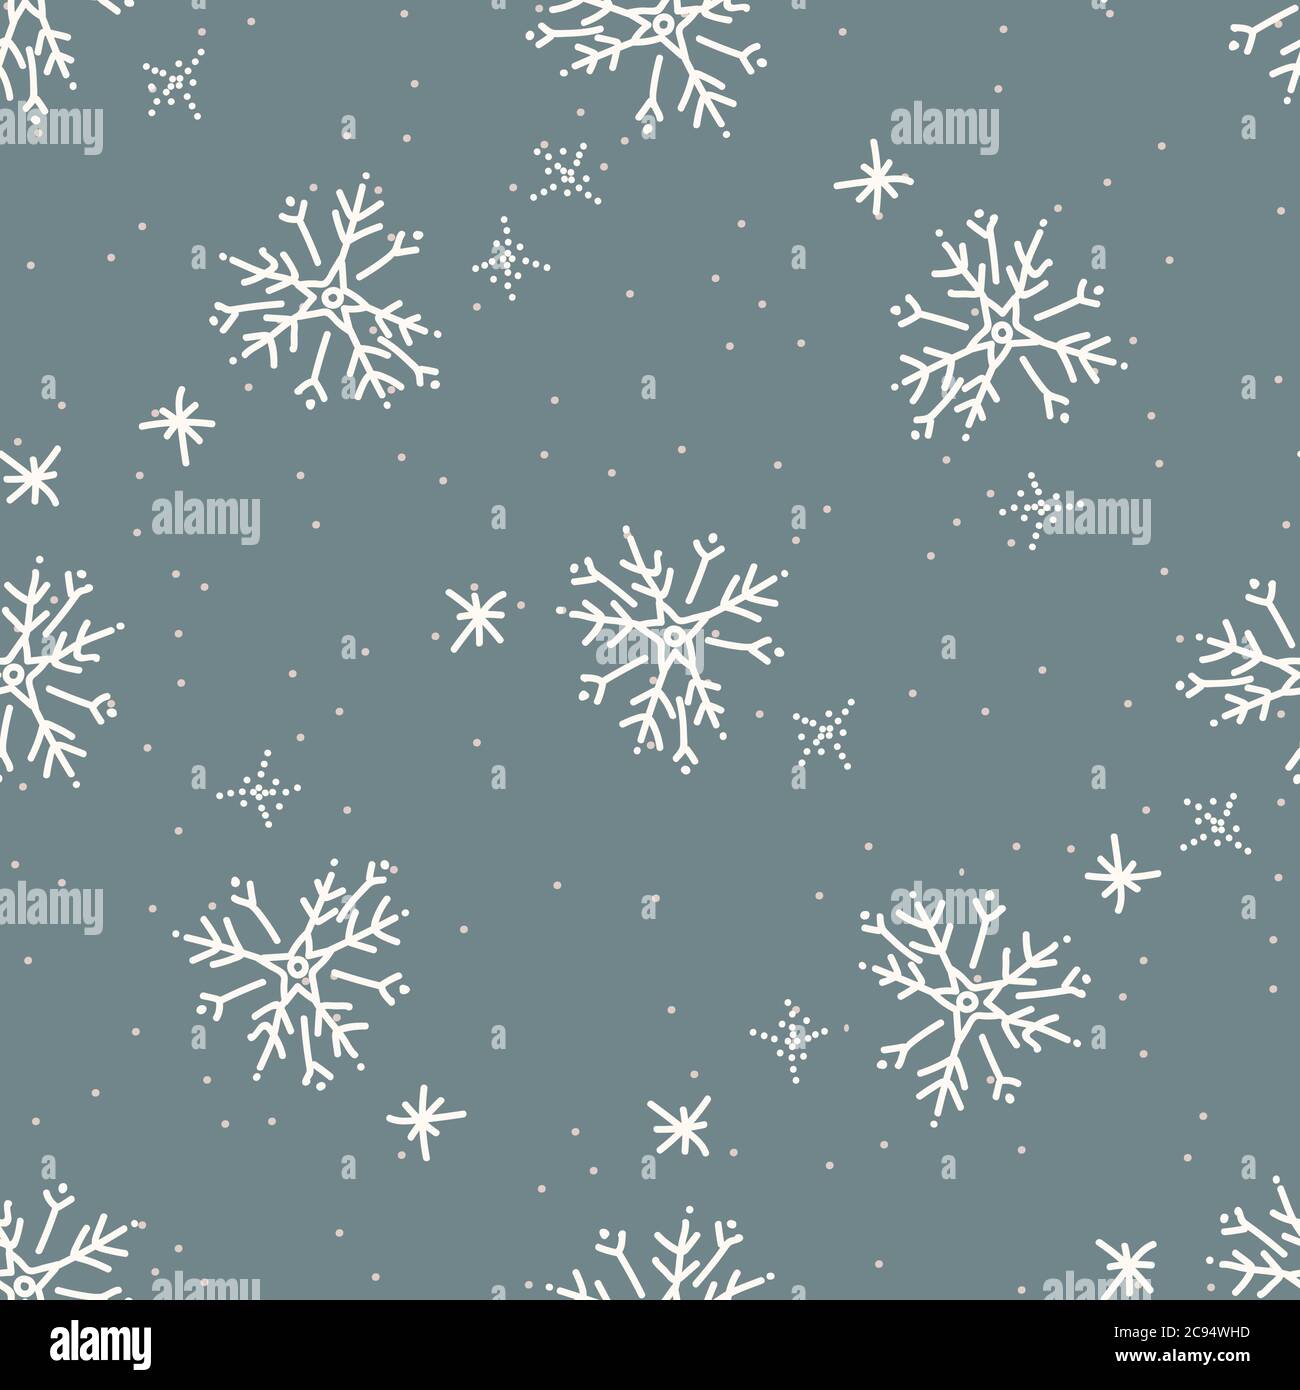 Subtle Snow Seamless Pattern Elegant Christmas Background With Small  Snowflakes Stock Illustration  Download Image Now  iStock